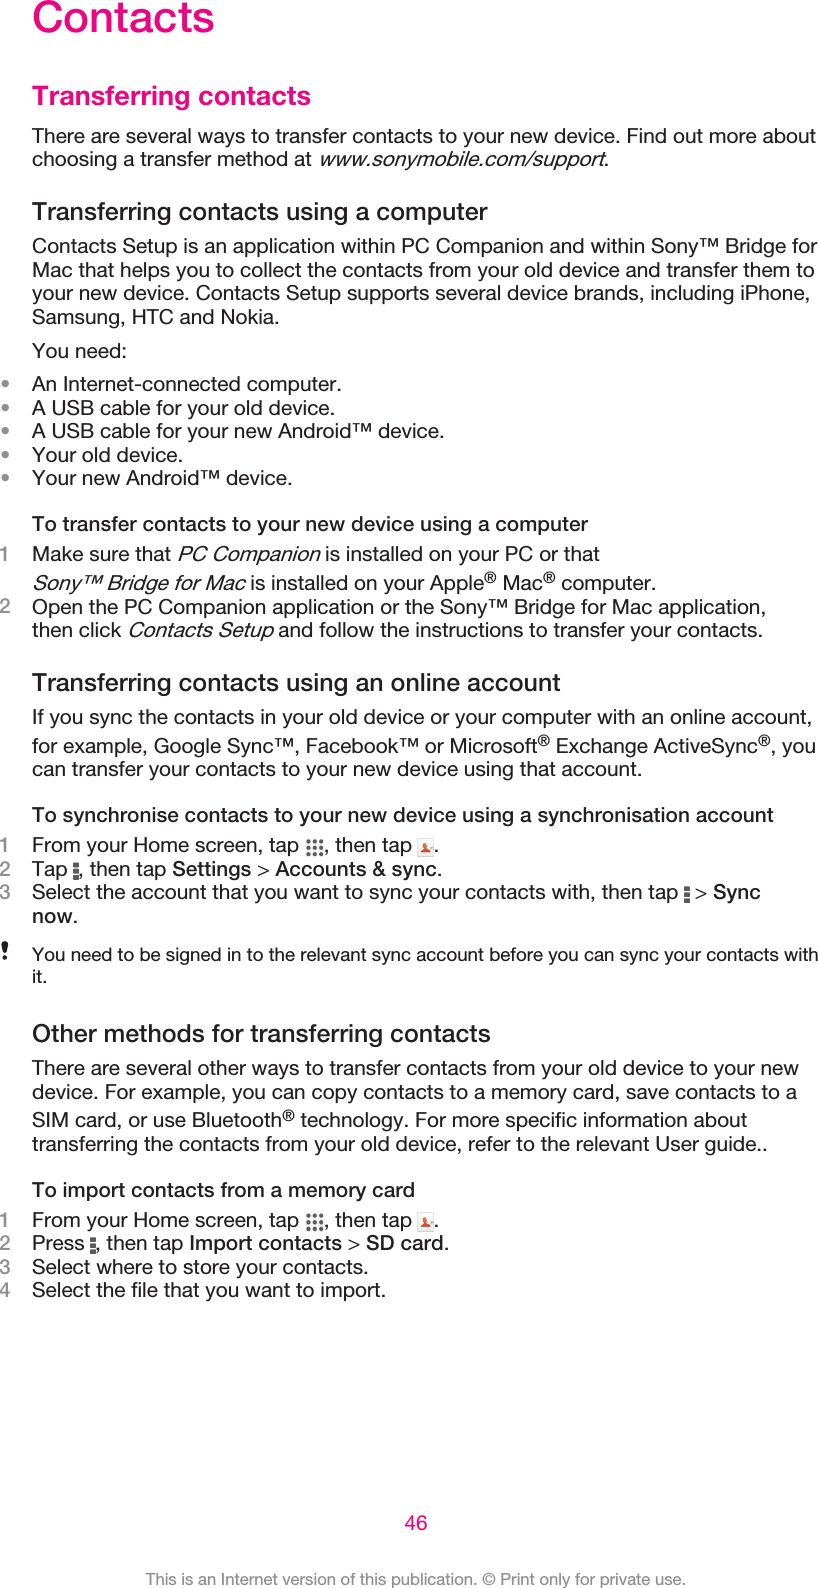 ContactsTransferring contactsThere are several ways to transfer contacts to your new device. Find out more aboutchoosing a transfer method at www.sonymobile.com/support.Transferring contacts using a computerContacts Setup is an application within PC Companion and within Sony™ Bridge forMac that helps you to collect the contacts from your old device and transfer them toyour new device. Contacts Setup supports several device brands, including iPhone,Samsung, HTC and Nokia.You need:•An Internet-connected computer.•A USB cable for your old device.•A USB cable for your new Android™ device.•Your old device.•Your new Android™ device.To transfer contacts to your new device using a computer1Make sure that PC Companion is installed on your PC or thatSony™ Bridge for Mac is installed on your Apple® Mac® computer.2Open the PC Companion application or the Sony™ Bridge for Mac application,then click Contacts Setup and follow the instructions to transfer your contacts.Transferring contacts using an online accountIf you sync the contacts in your old device or your computer with an online account,for example, Google Sync™, Facebook™ or Microsoft® Exchange ActiveSync®, youcan transfer your contacts to your new device using that account.To synchronise contacts to your new device using a synchronisation account1From your Home screen, tap  , then tap  .2Tap  , then tap Settings &gt; Accounts &amp; sync.3Select the account that you want to sync your contacts with, then tap   &gt; Syncnow.You need to be signed in to the relevant sync account before you can sync your contacts withit.Other methods for transferring contactsThere are several other ways to transfer contacts from your old device to your newdevice. For example, you can copy contacts to a memory card, save contacts to aSIM card, or use Bluetooth® technology. For more specific information abouttransferring the contacts from your old device, refer to the relevant User guide..To import contacts from a memory card1From your Home screen, tap  , then tap  .2Press  , then tap Import contacts &gt; SD card.3Select where to store your contacts.4Select the file that you want to import.46This is an Internet version of this publication. © Print only for private use.